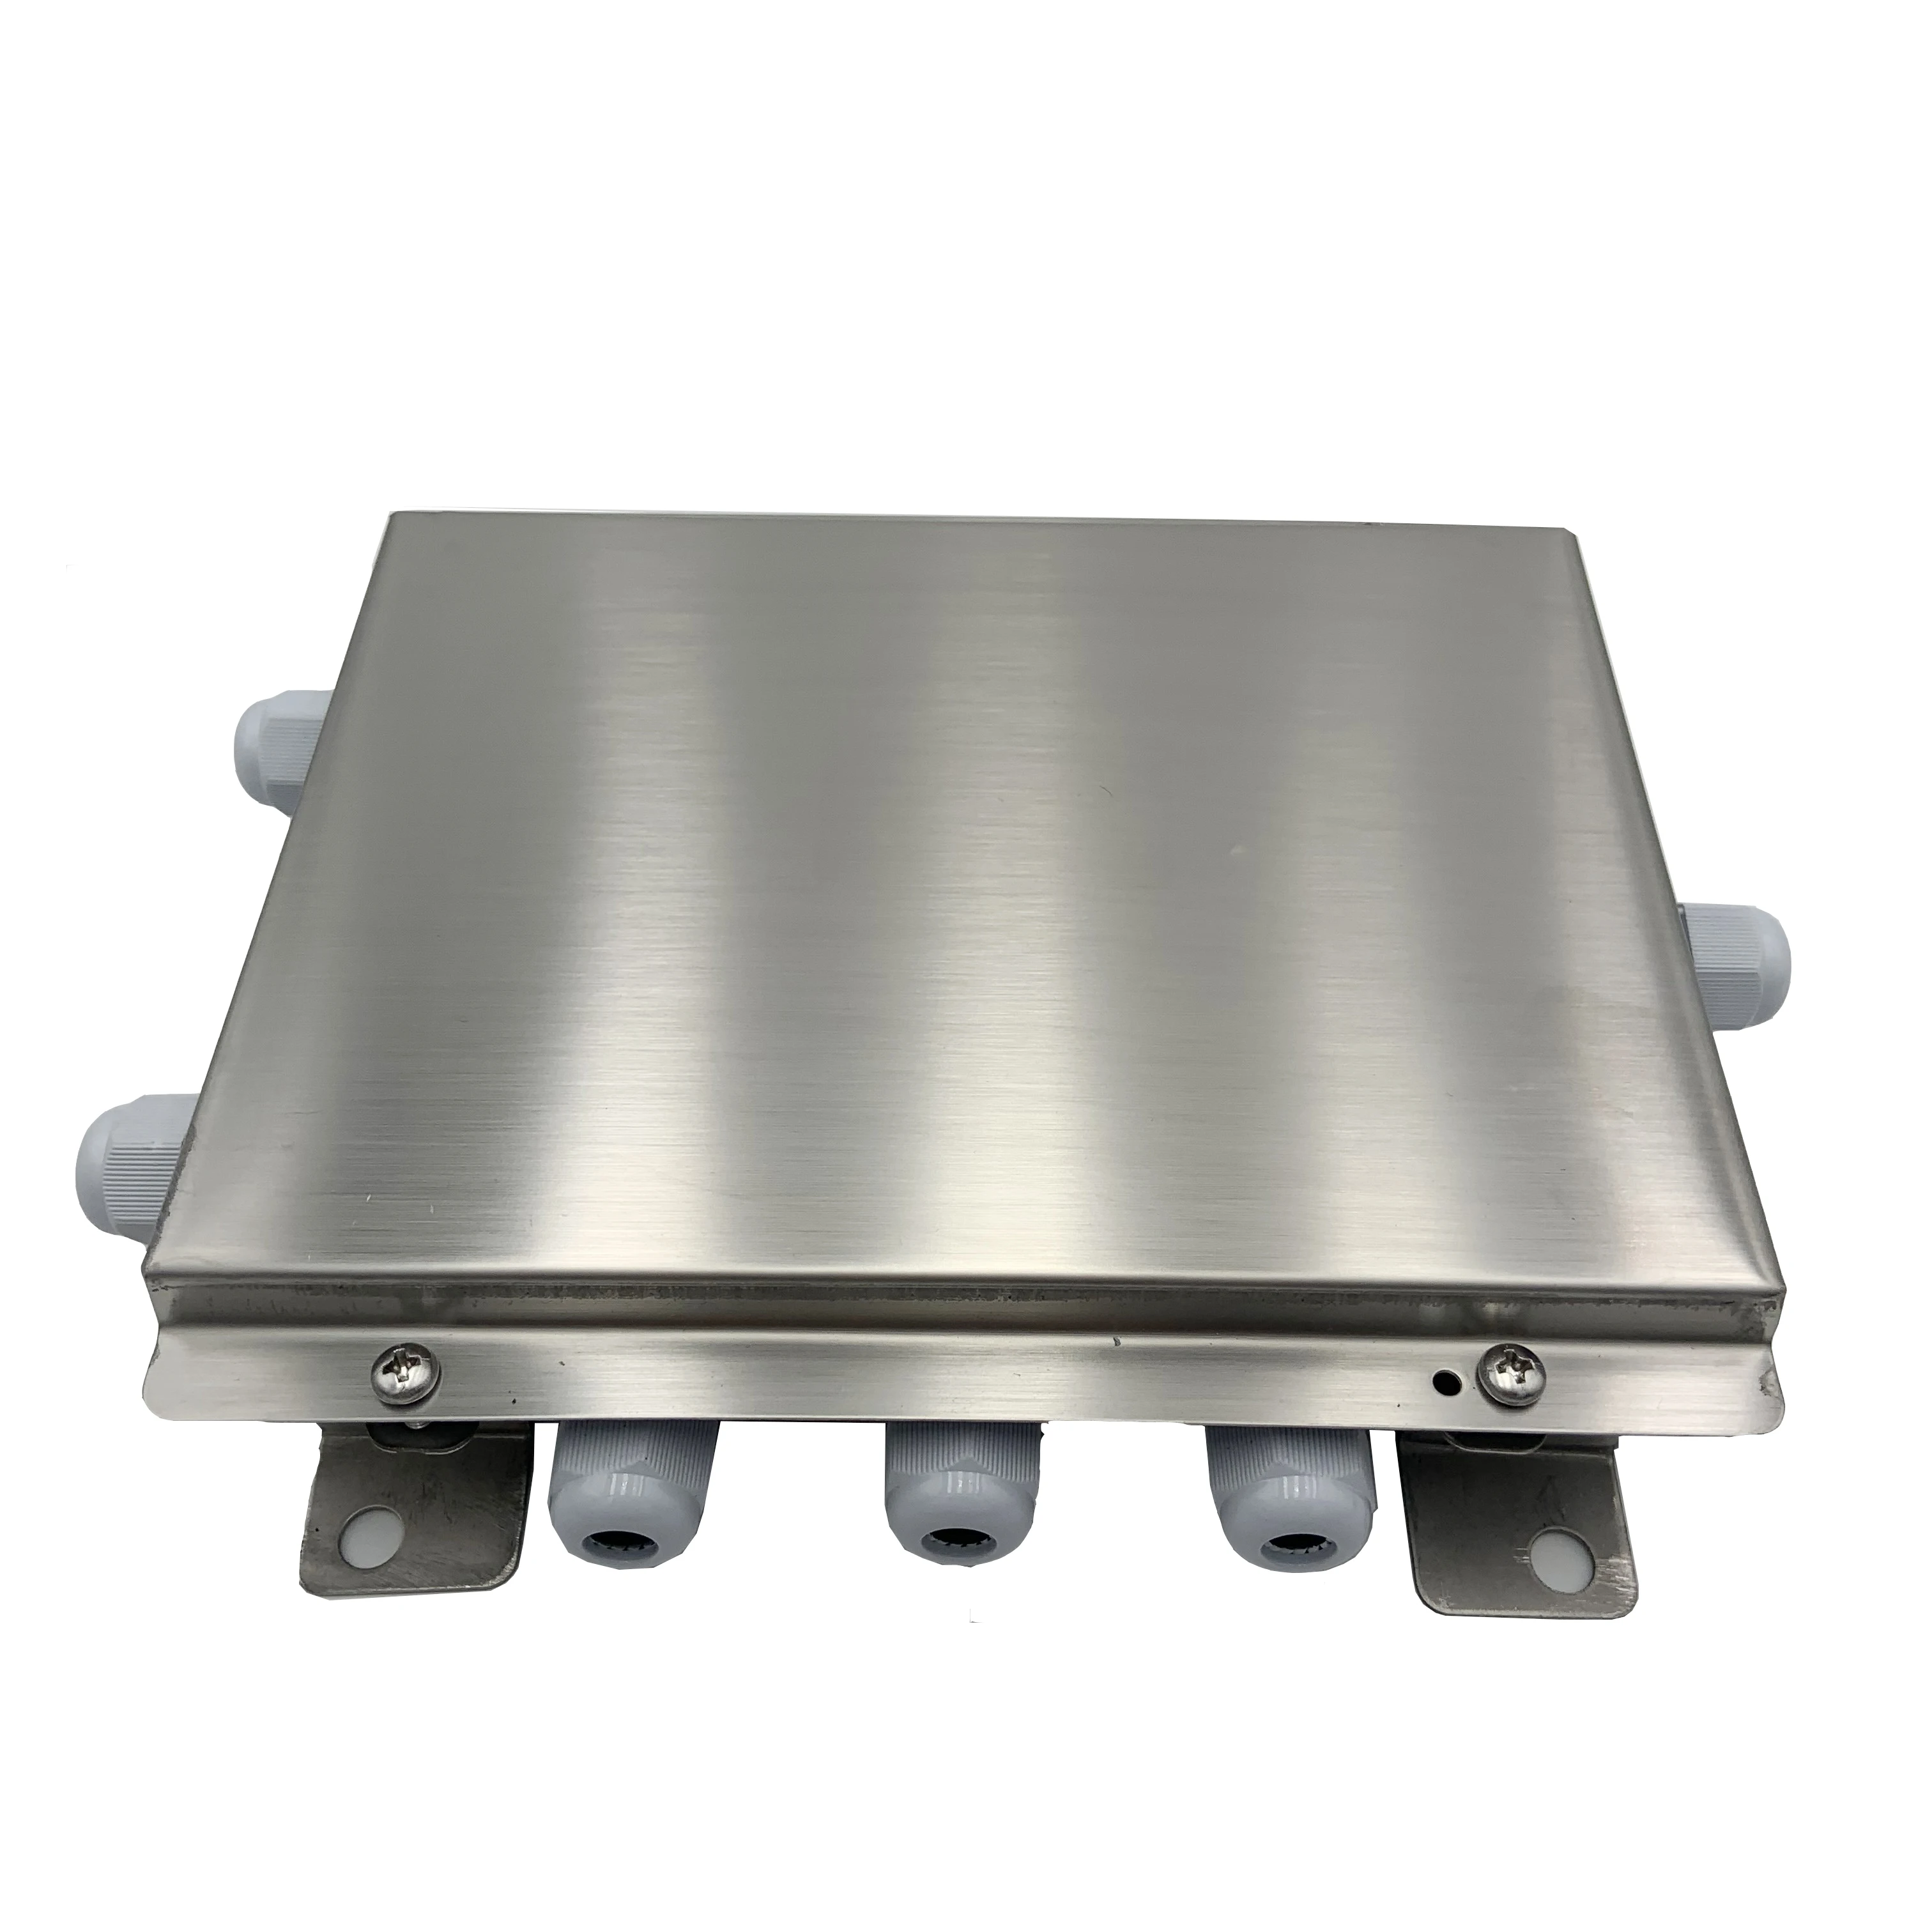 

Stainless Steel Scales Surge Protect JBT-8 Load Cell Junction Box For Weighing Apparatus